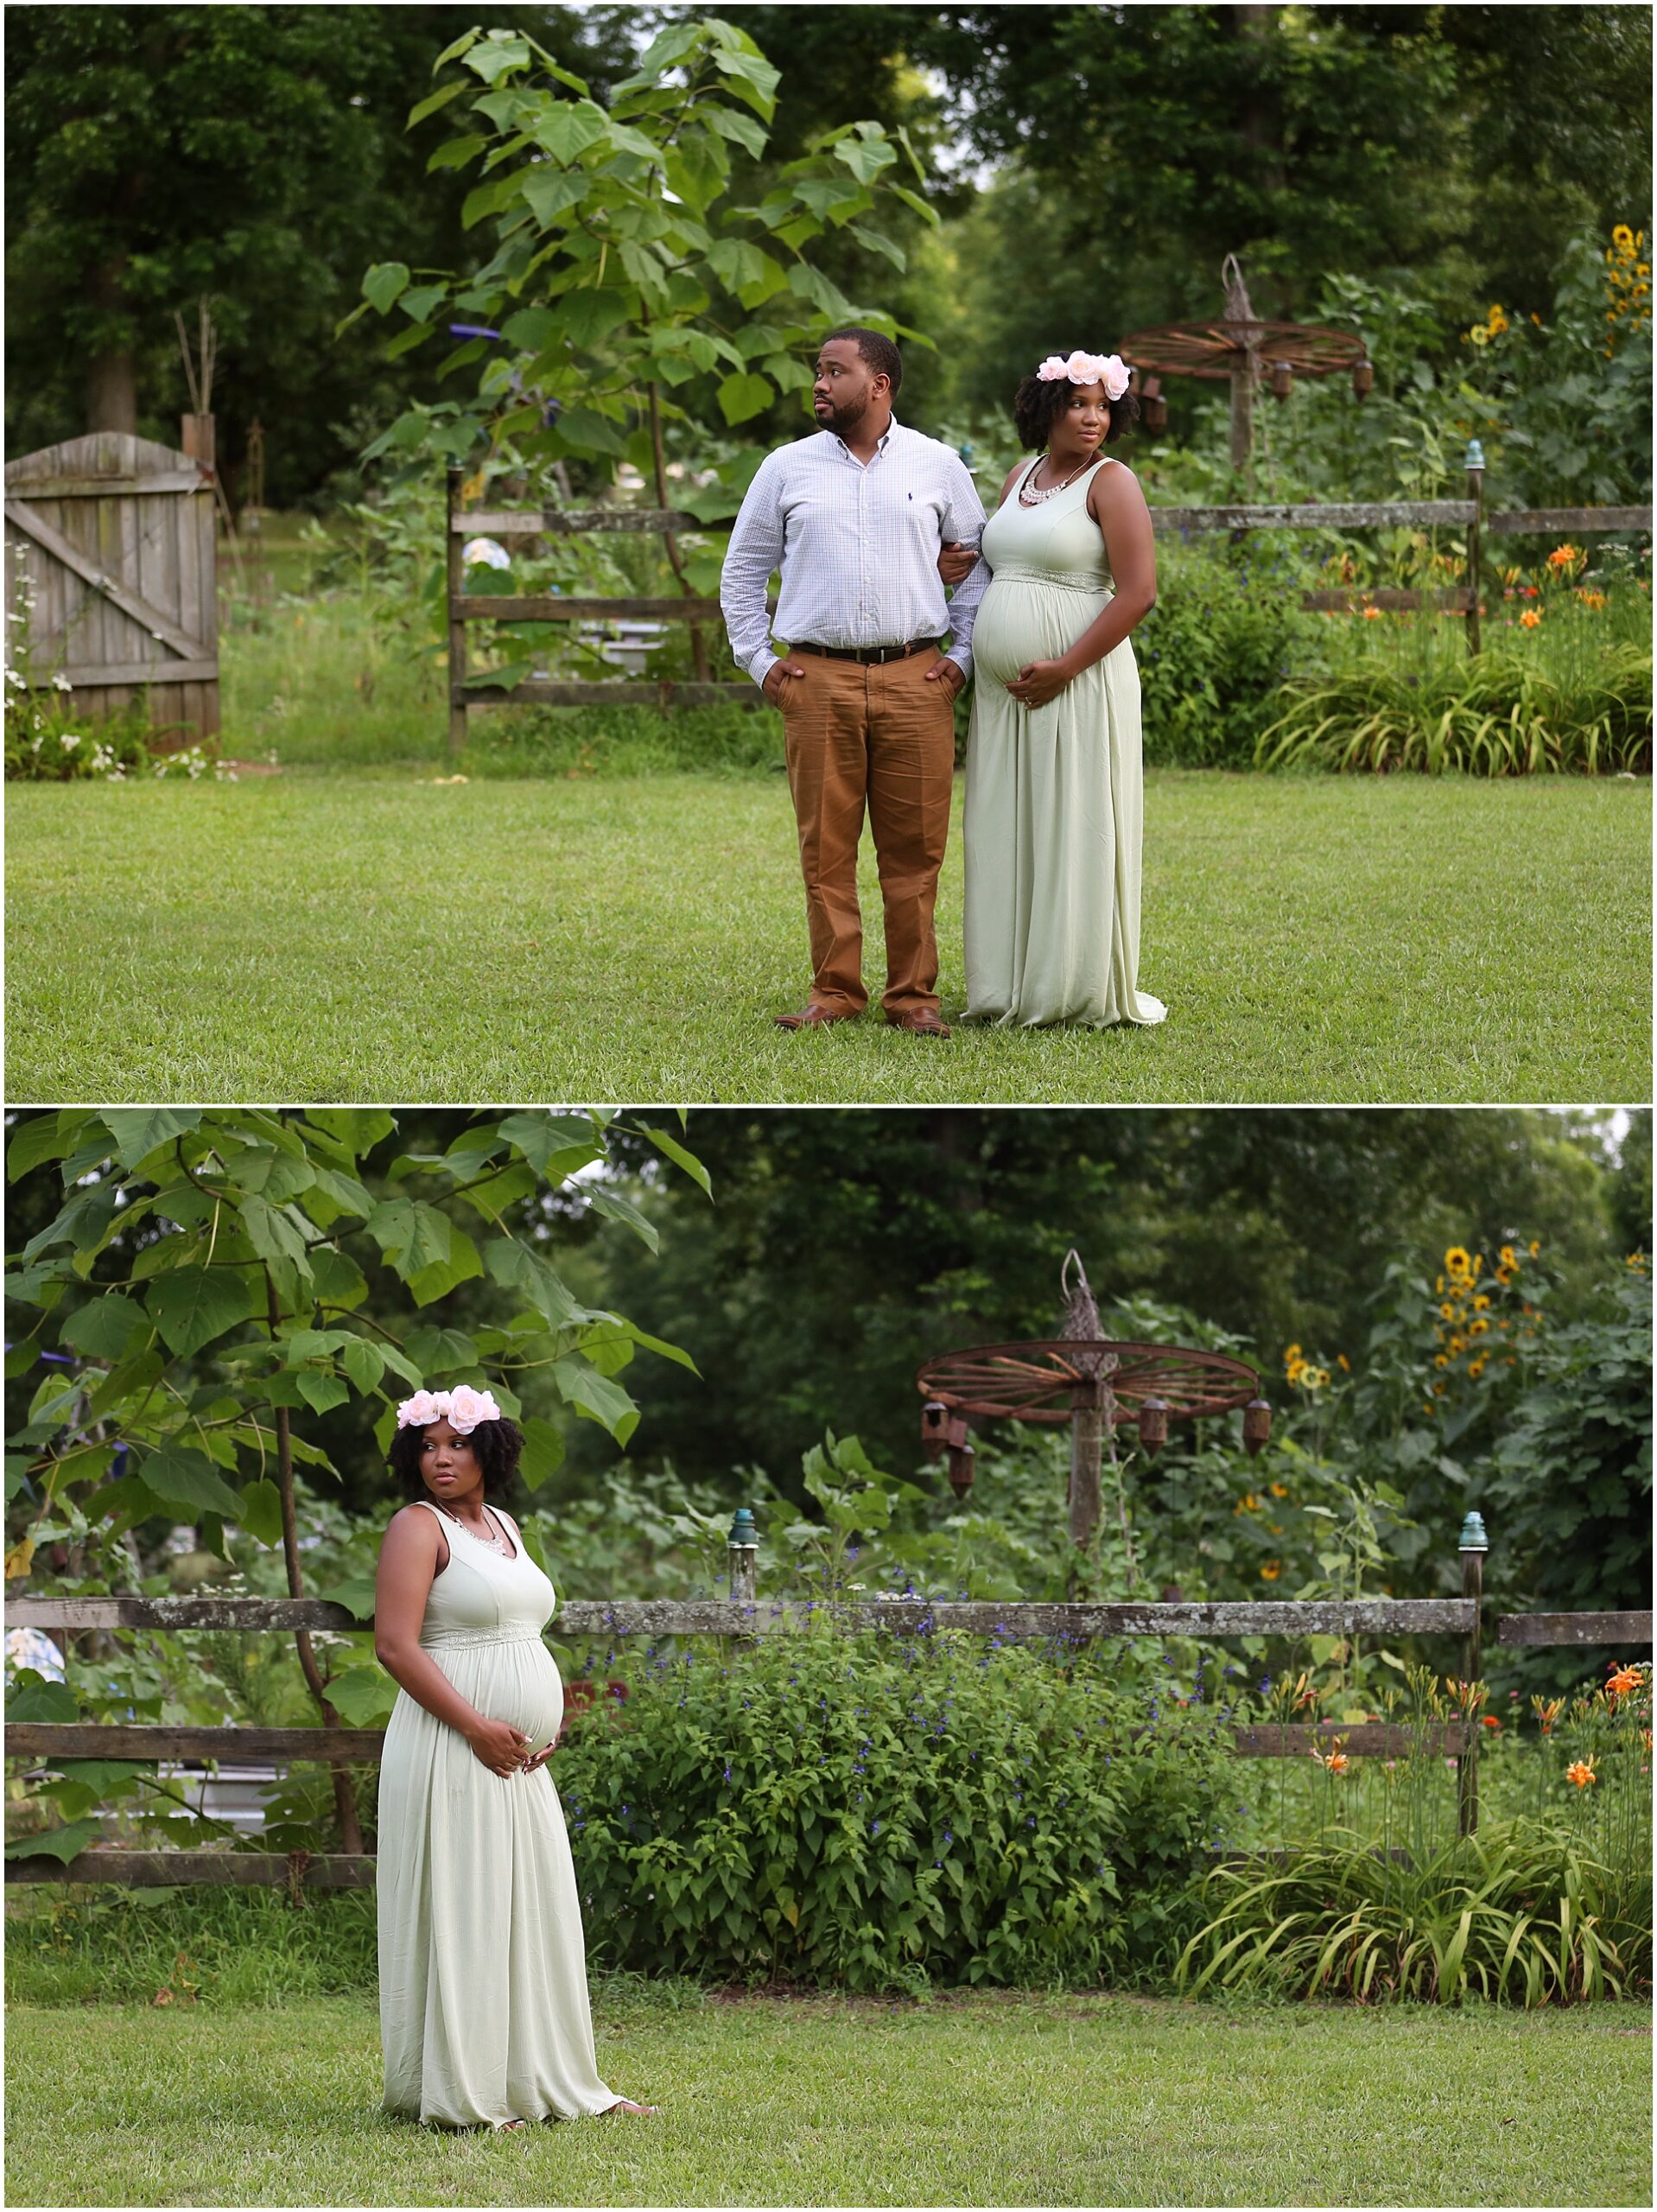 Romantic Garden Maternity Session by Two Chics Photography | www.twochicsphotography.com